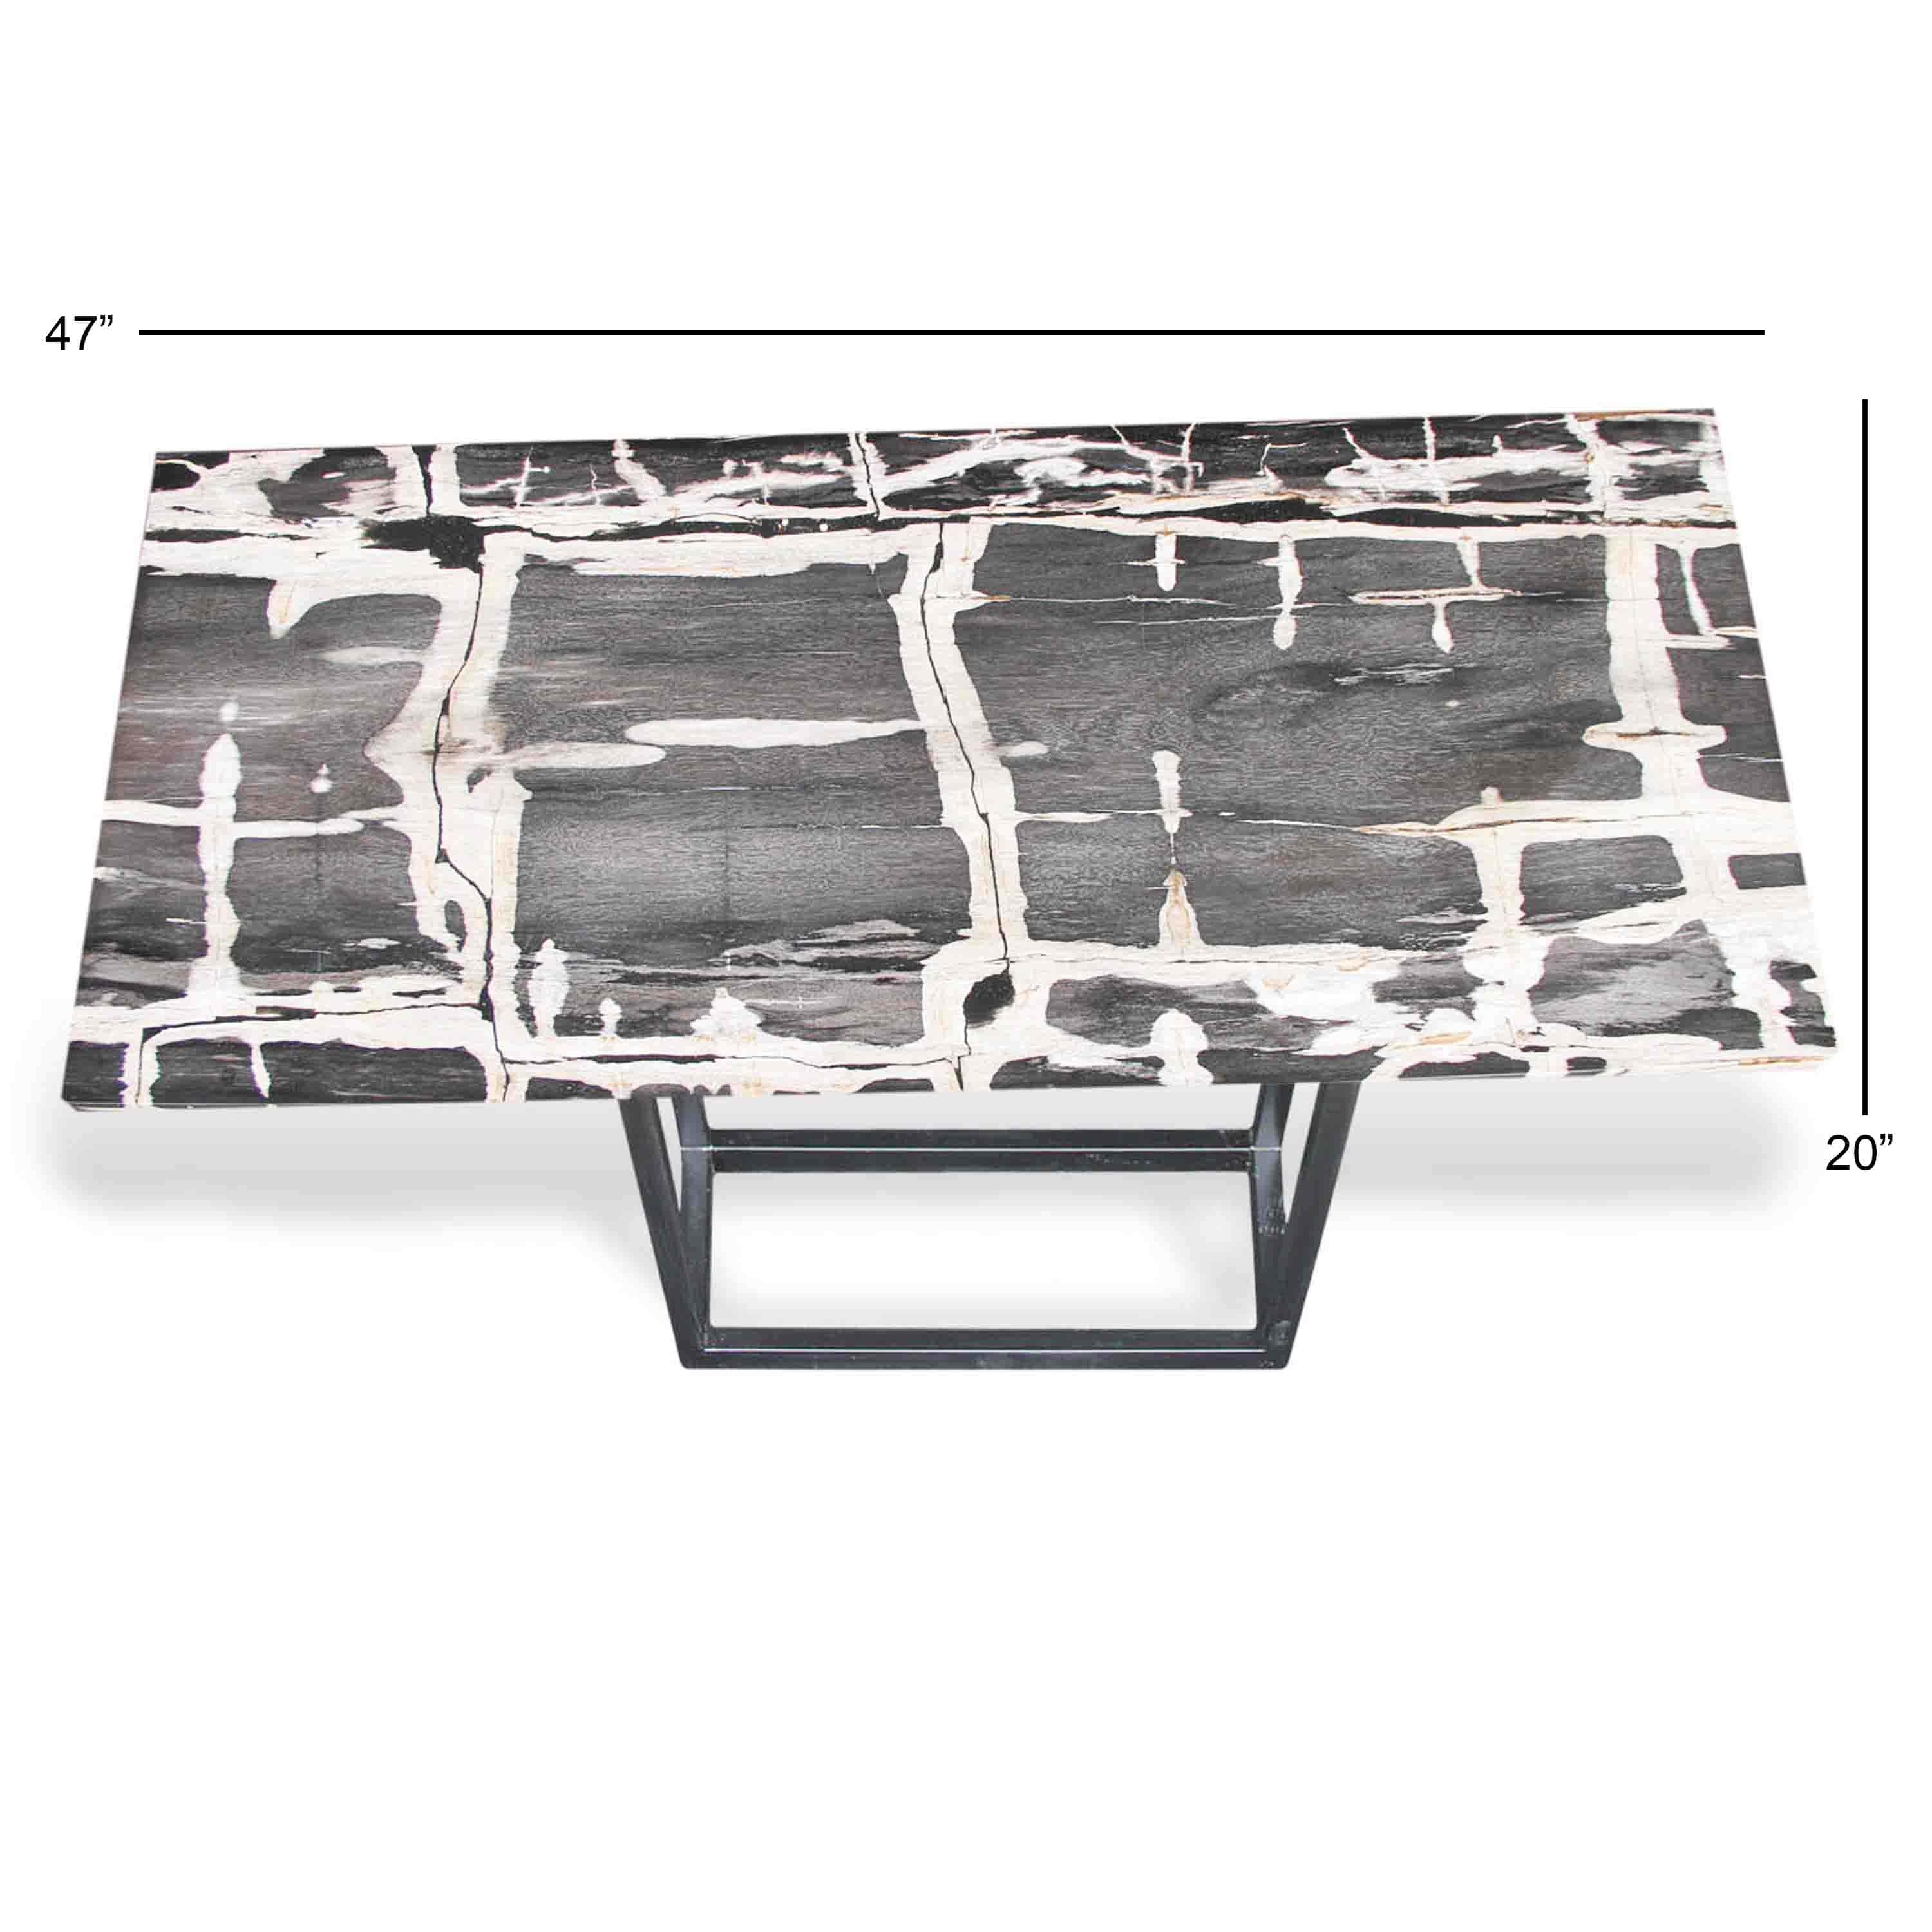 Kalifano Petrified Wood Natural Polished Petrified Wood Console Table from Indonesia - 47" / 152 lbs PWR8300.001